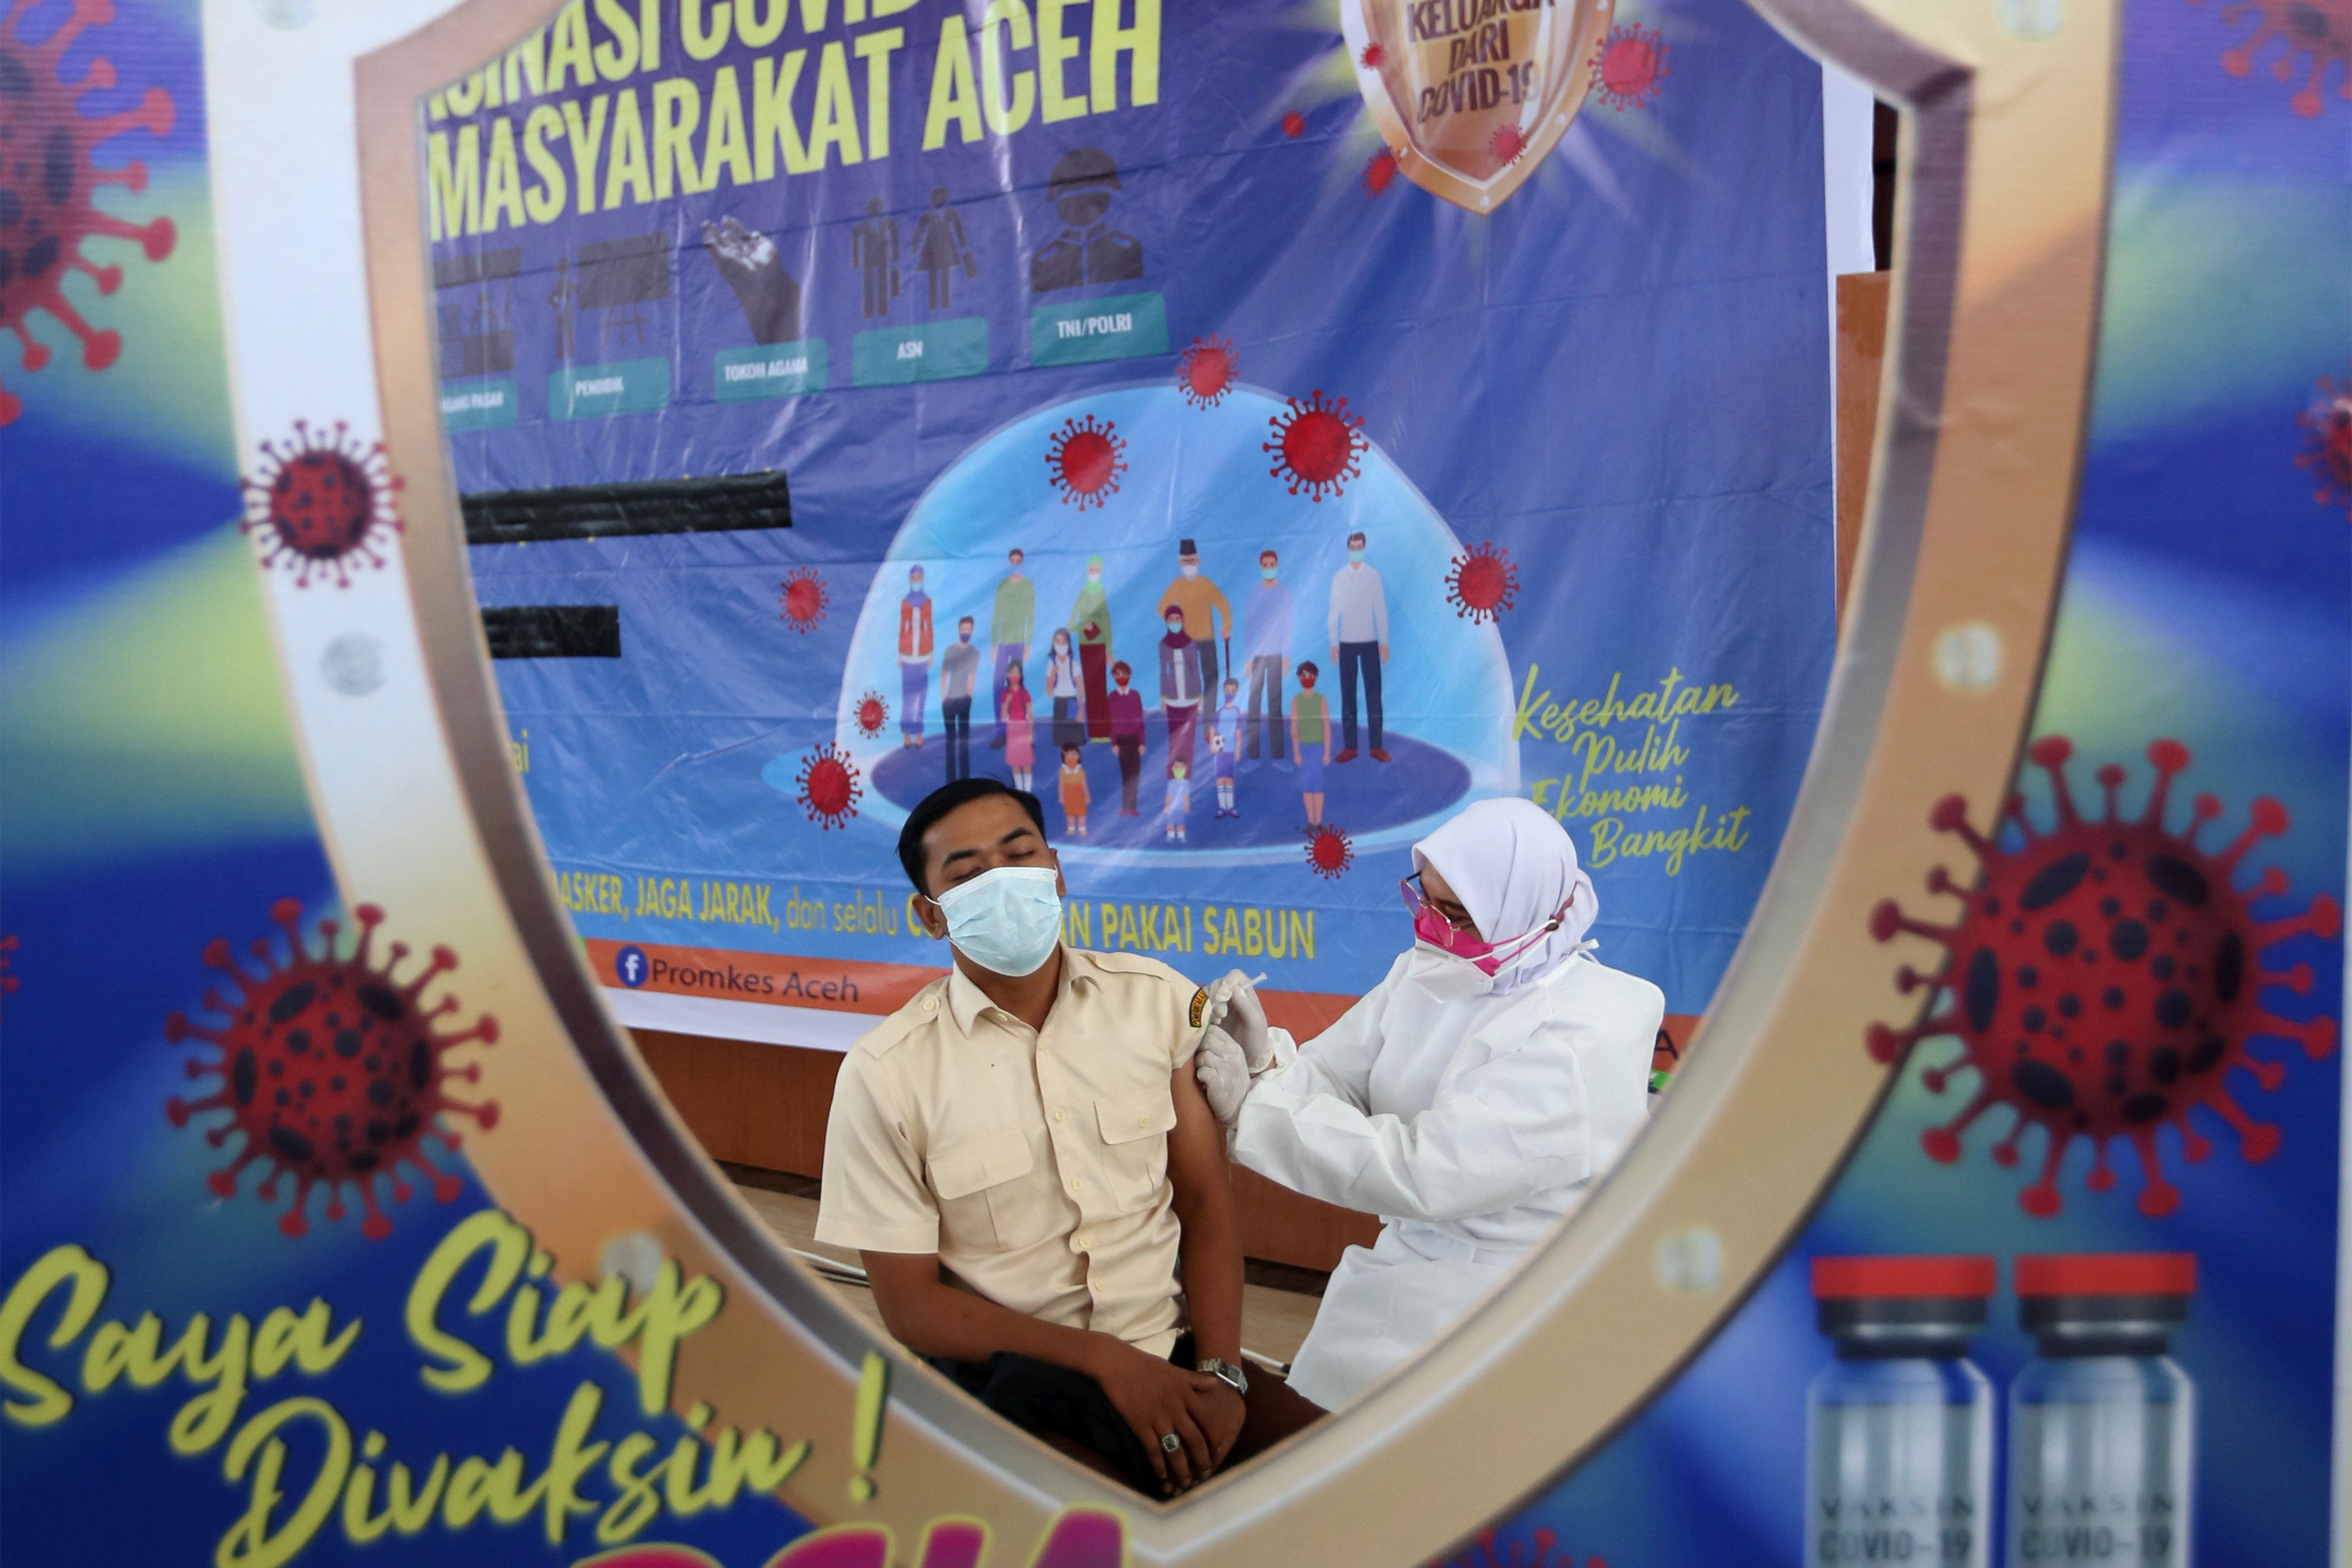 Mass vaccination against COVID-19 in Banda Aceh